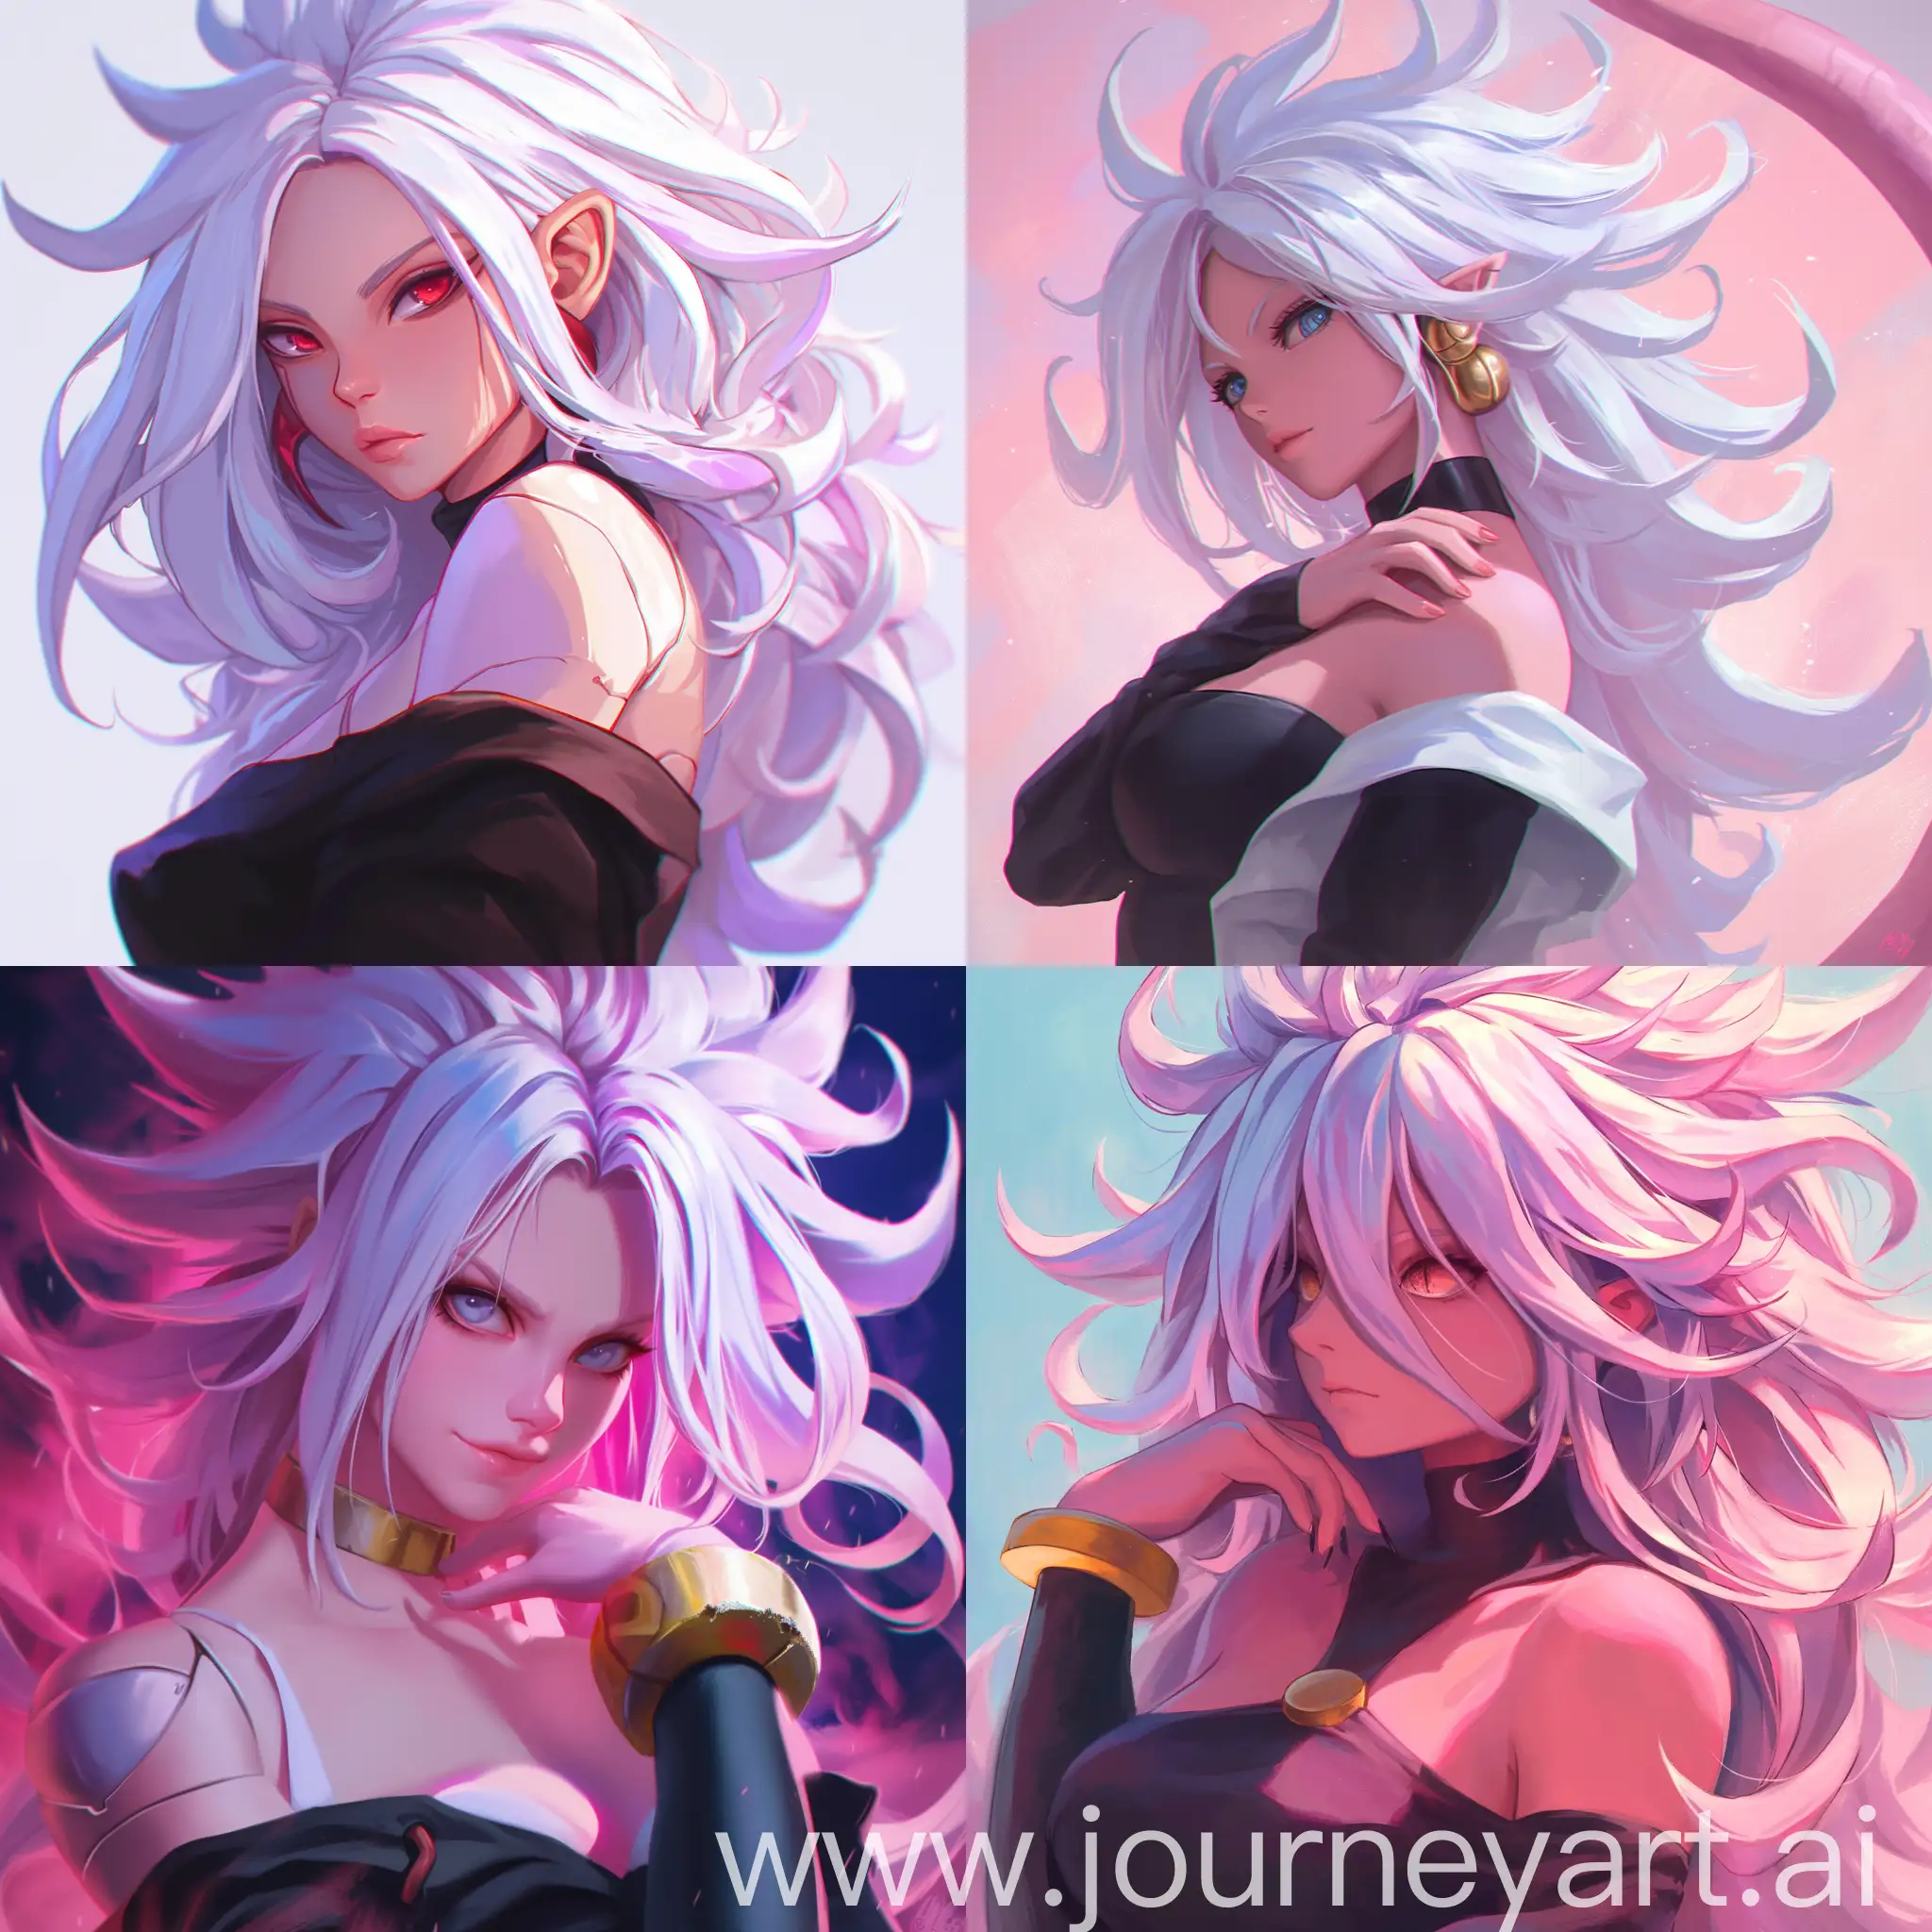 Majin-Android-21-Anime-Realism-Art-HalfBody-Illustration-with-Vibrant-Color-Palette